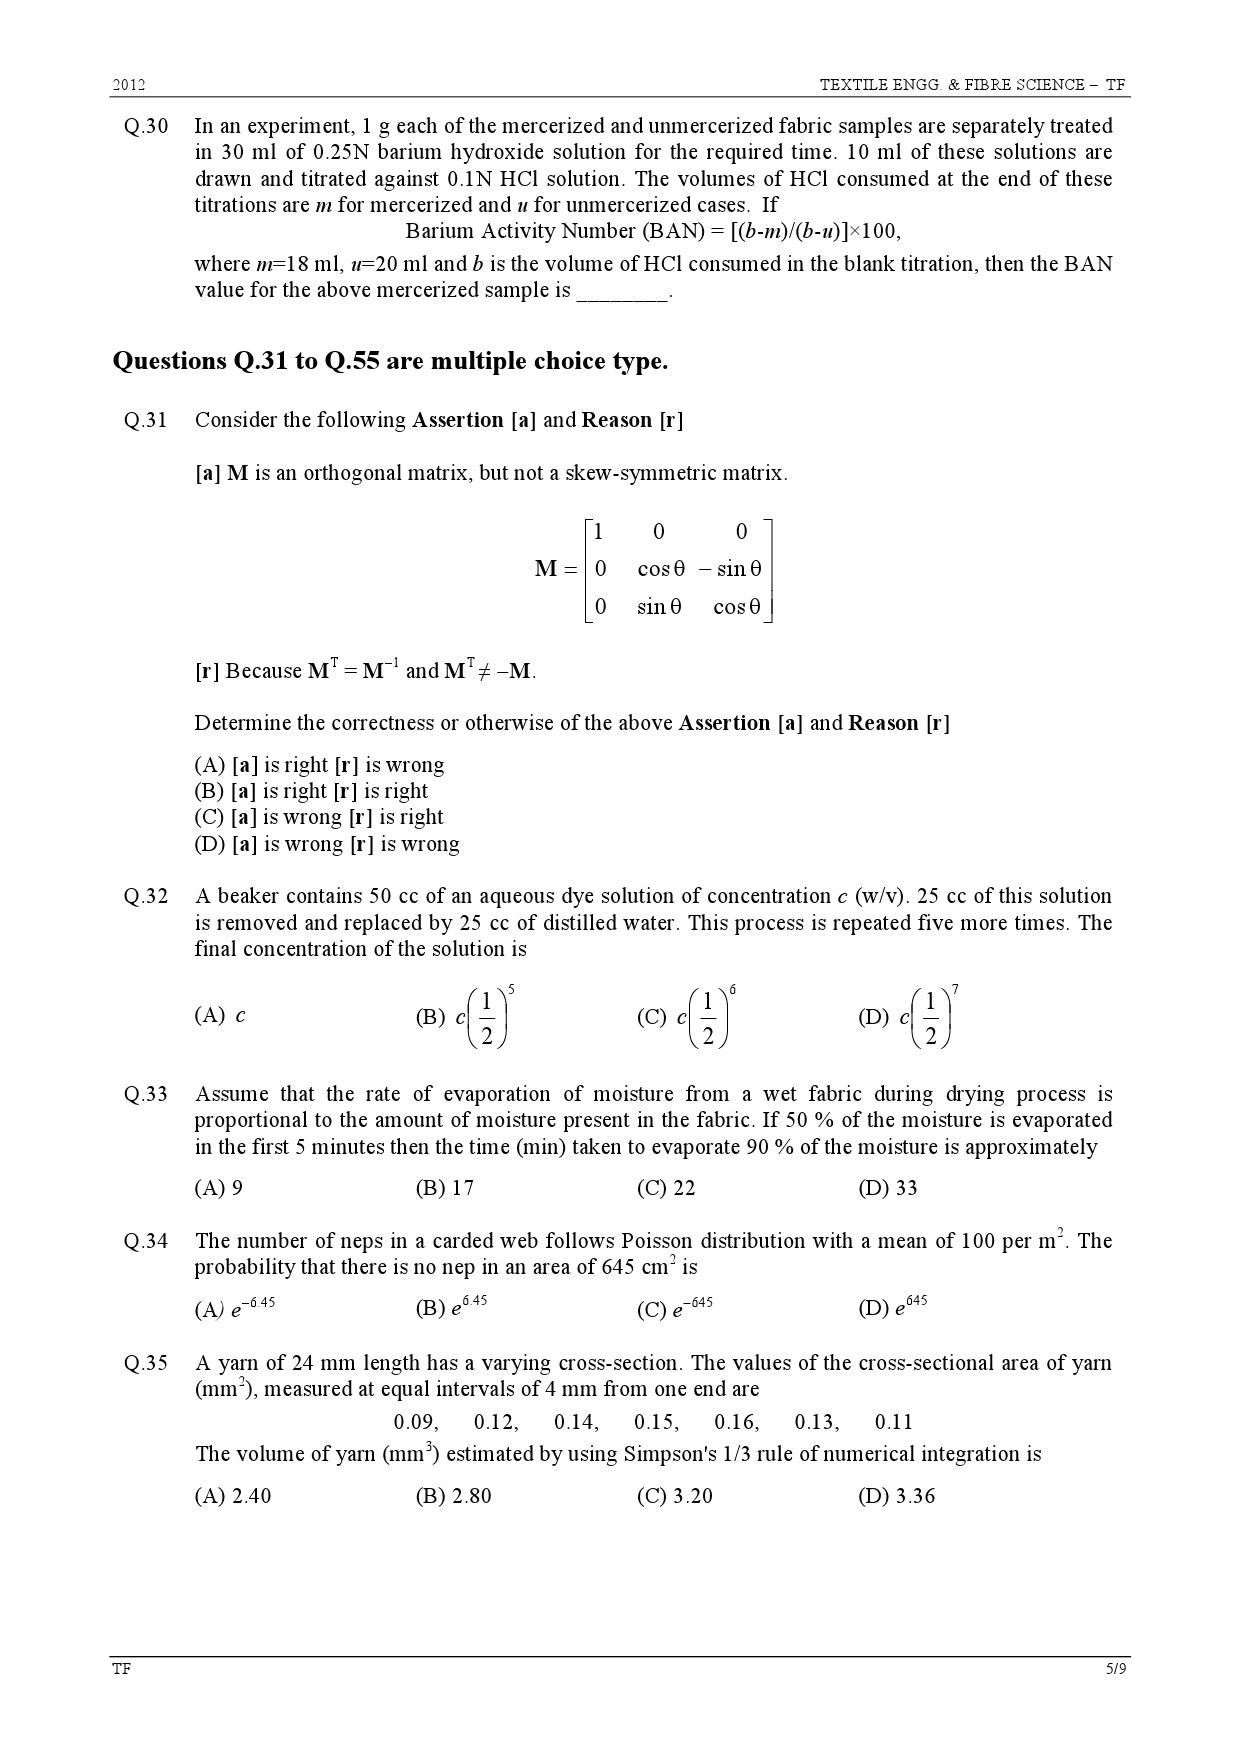 GATE Exam Question Paper 2012 Textile Engineering and Fibre Science 5